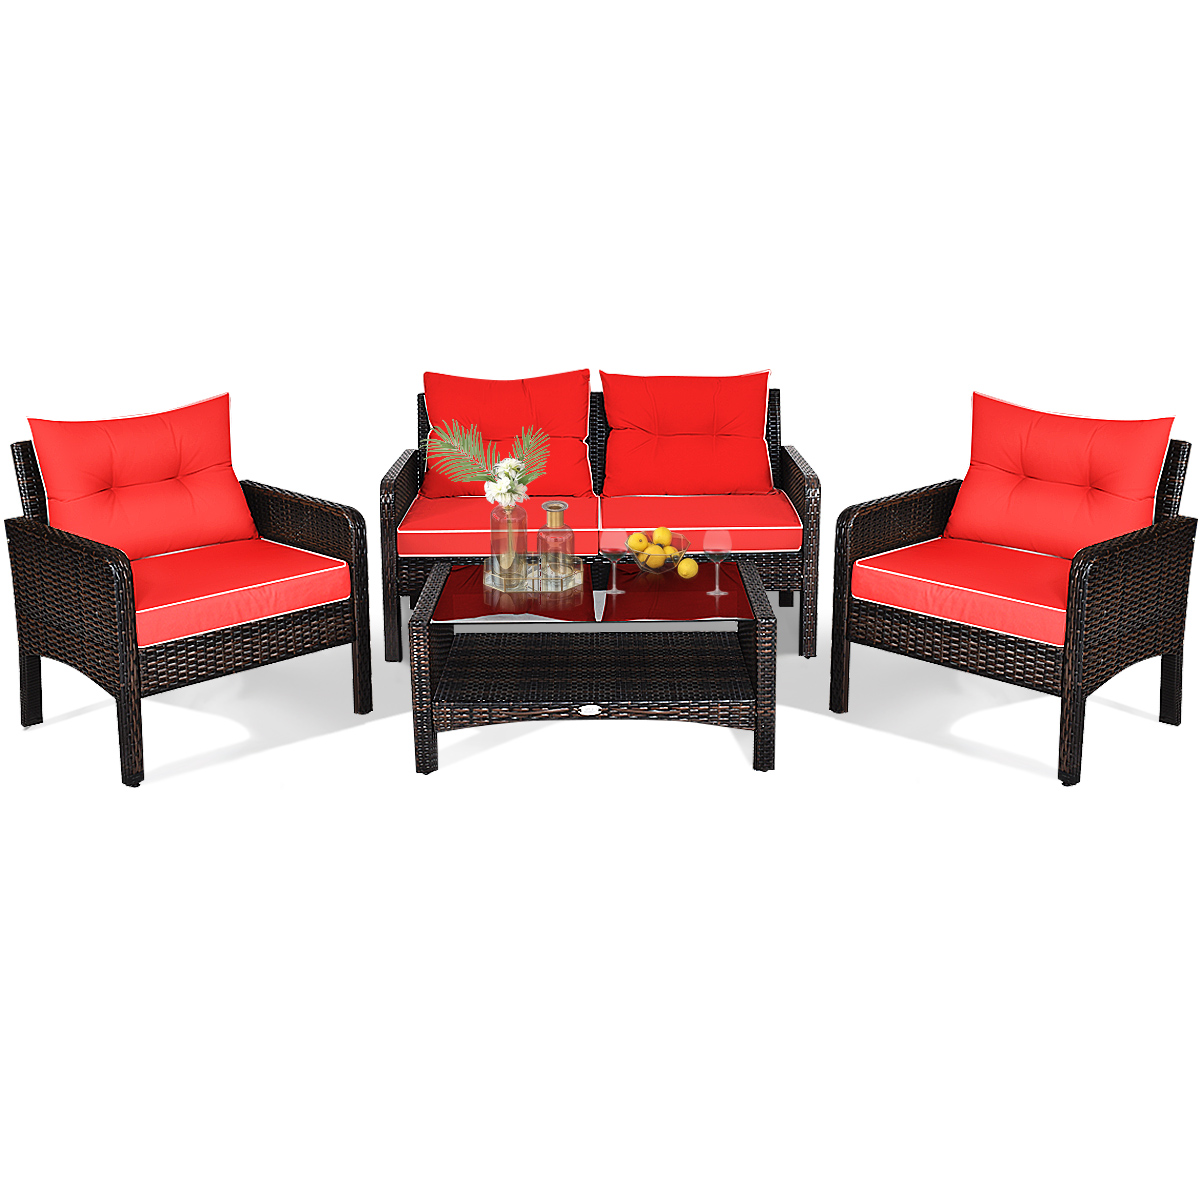 Gymax 4PCS Rattan Patio Conversation Set Red Cushioned Outdoor Furniture Set - image 4 of 9